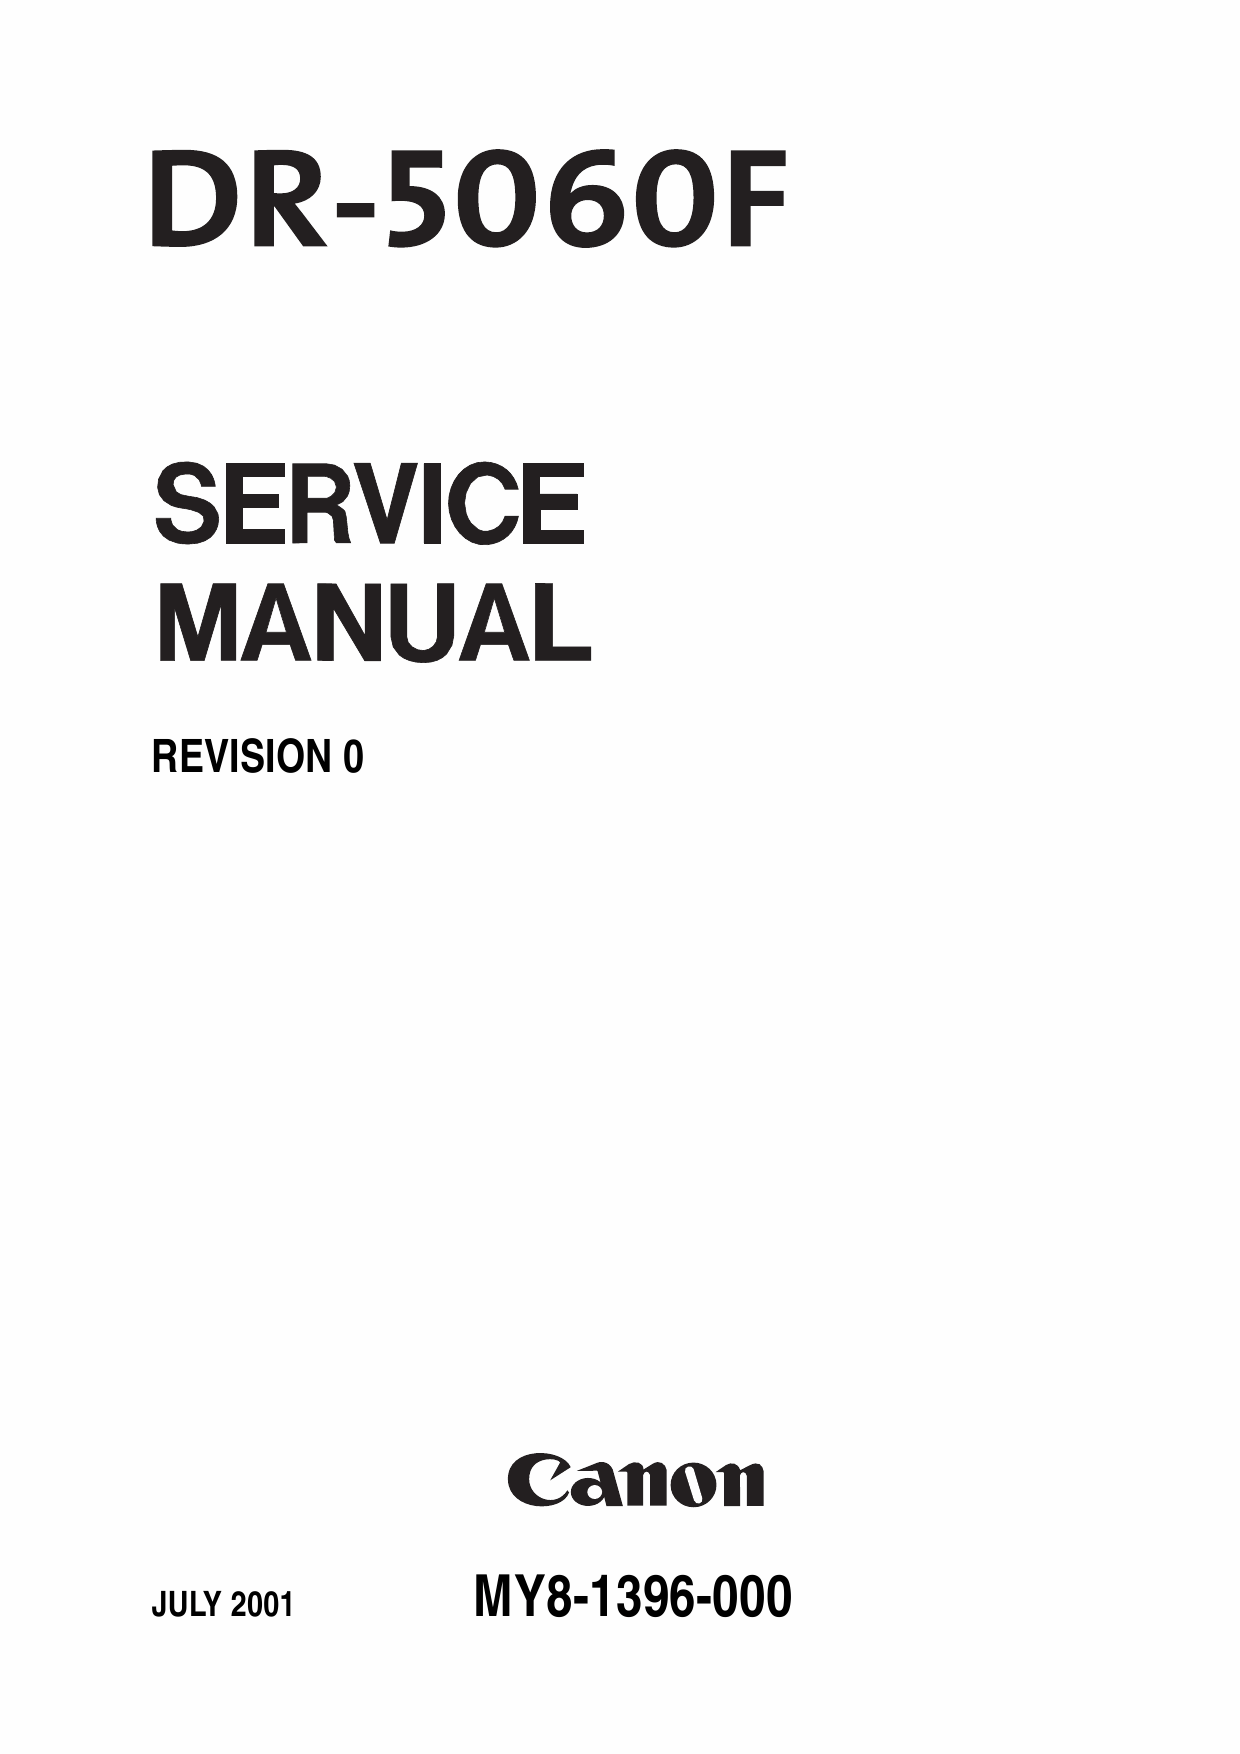 Canon Options DR-5060F Document-Scanner Parts and Service Manual-1